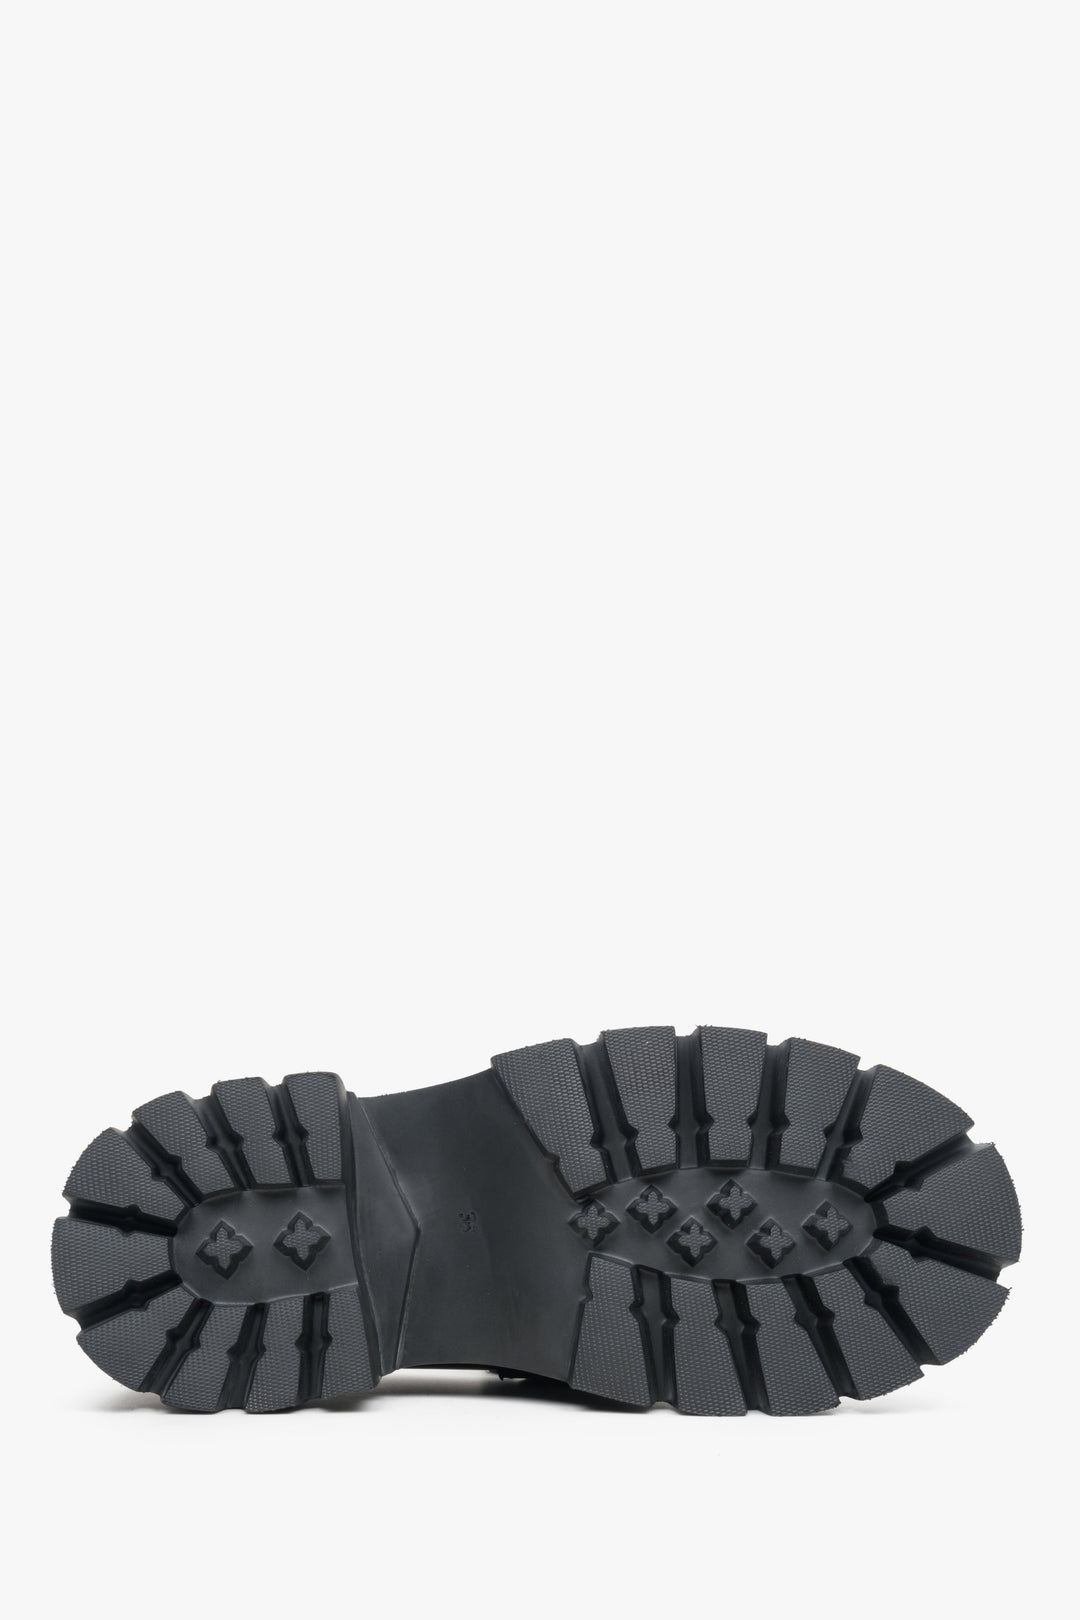  Women's moccasins with a wide sole made of natural leather in black - close-up on the sole.